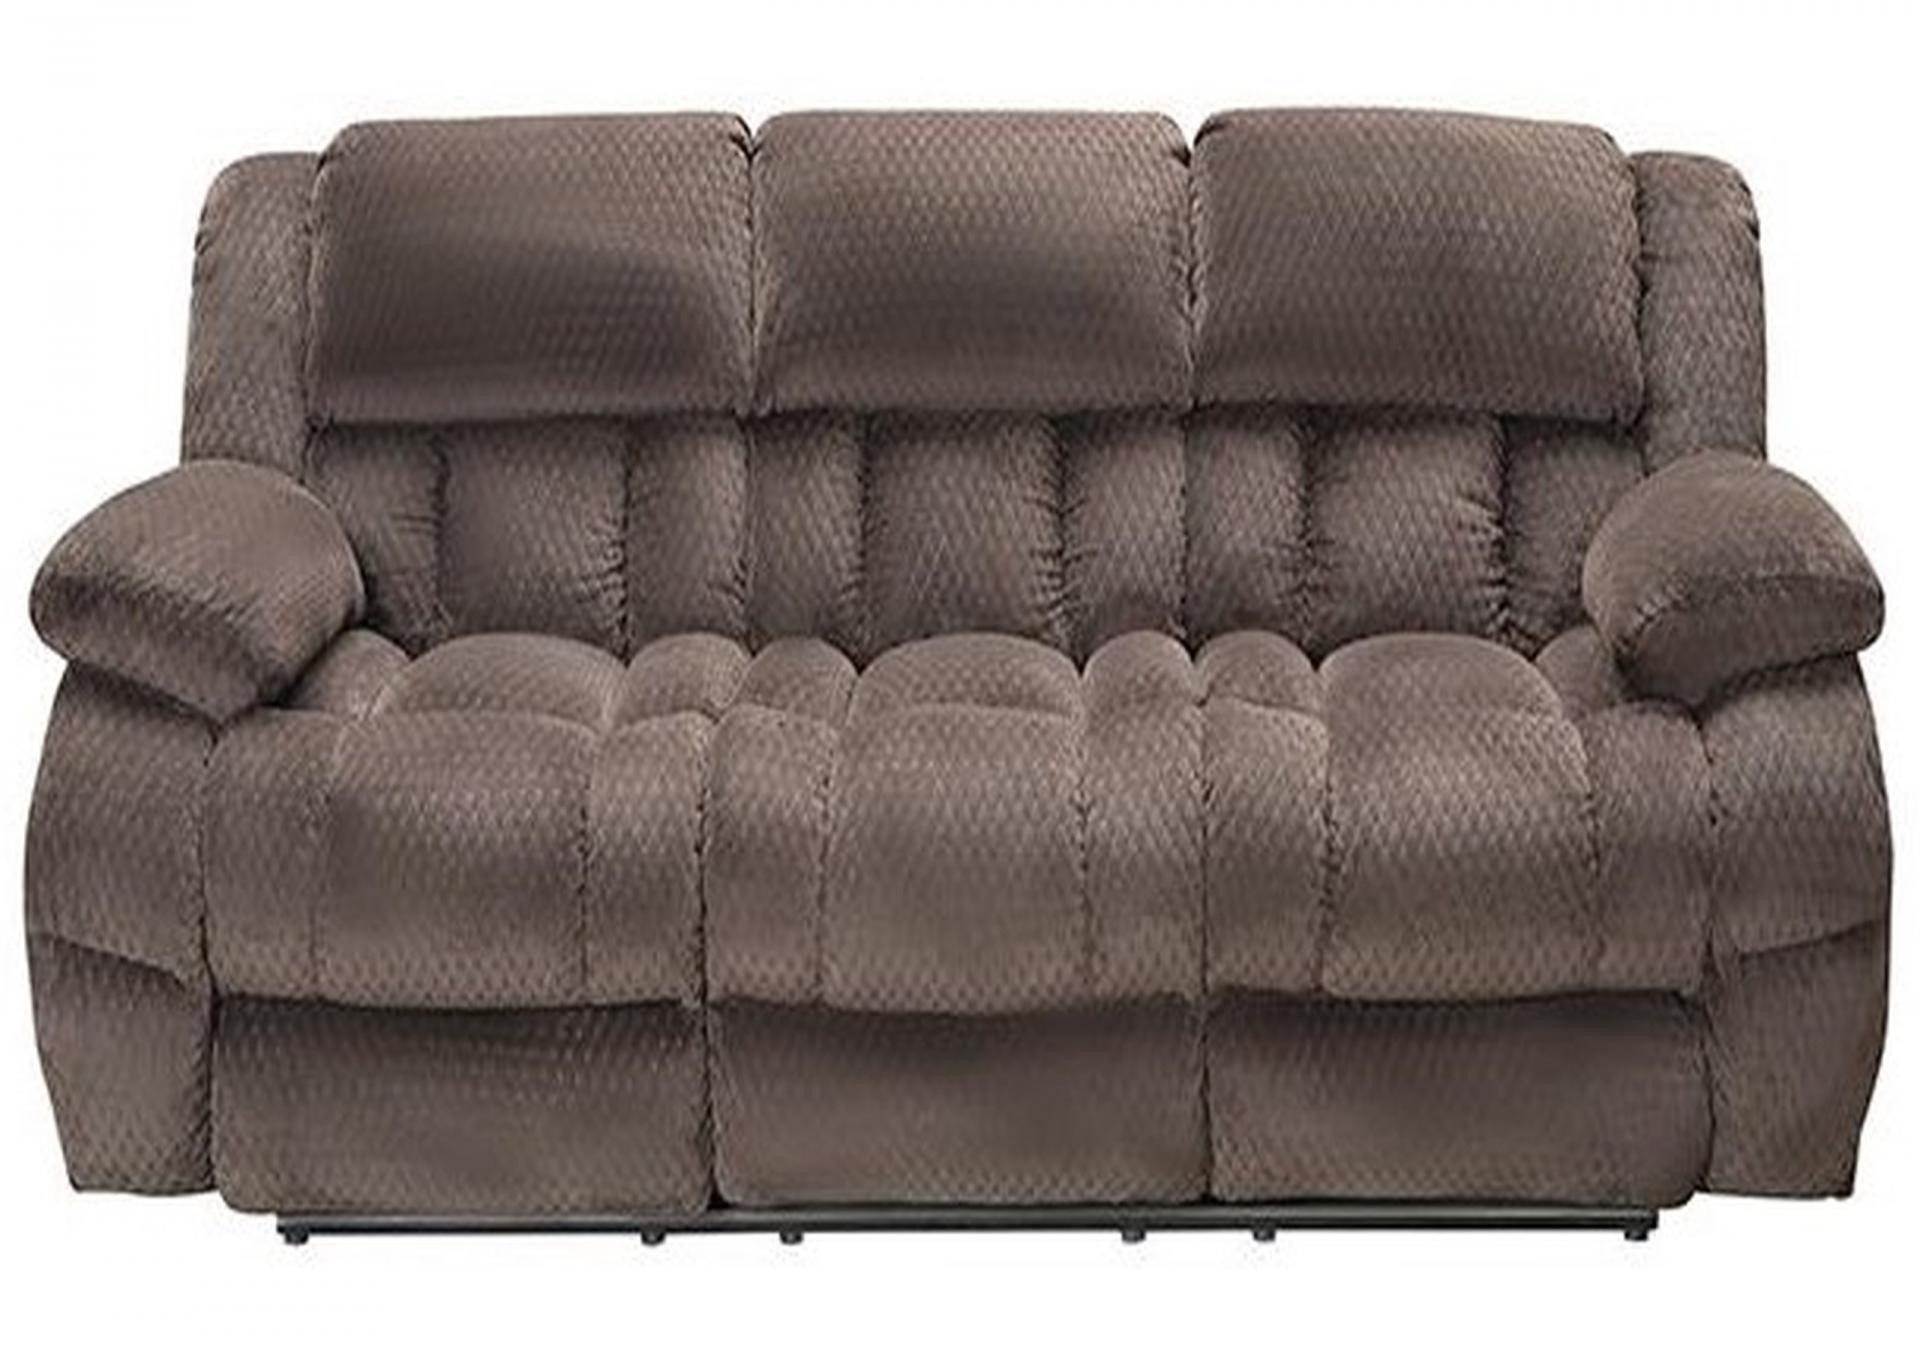 Dual Reclining Chocolate Sofa with Manual Pull Handles